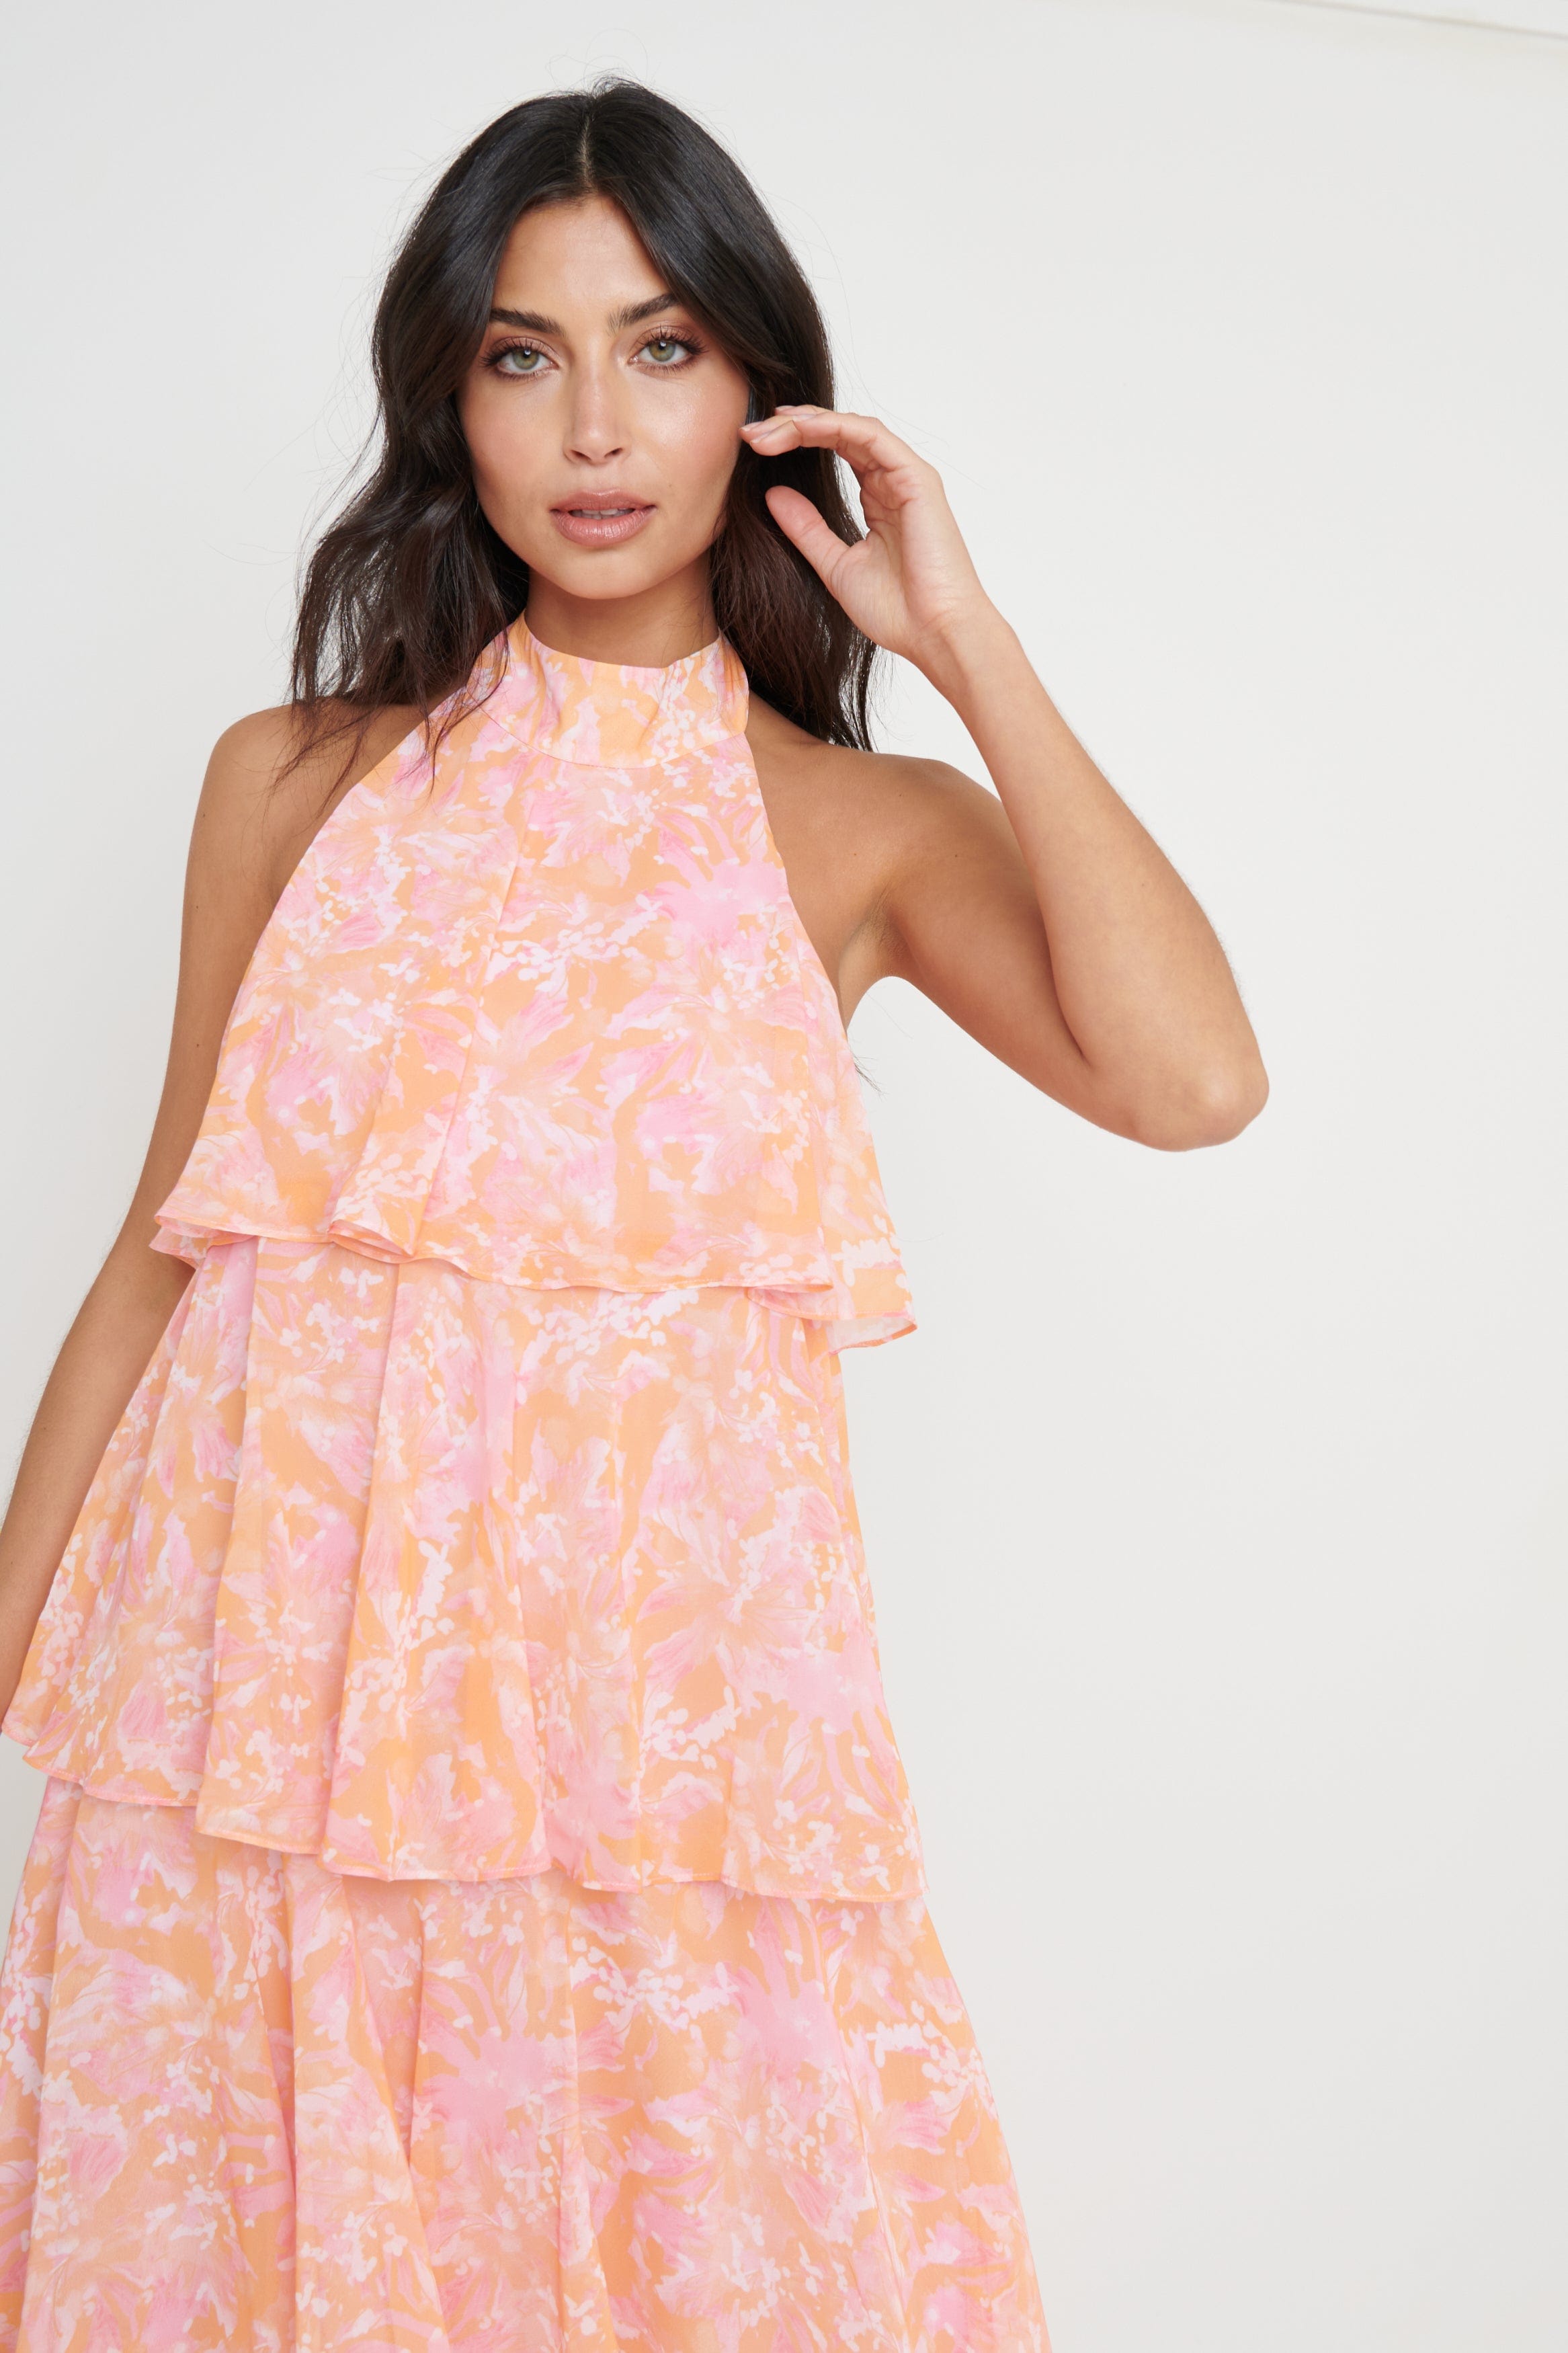 Thea Halter Neck Ruffle Dress - Pink and Orange Floral